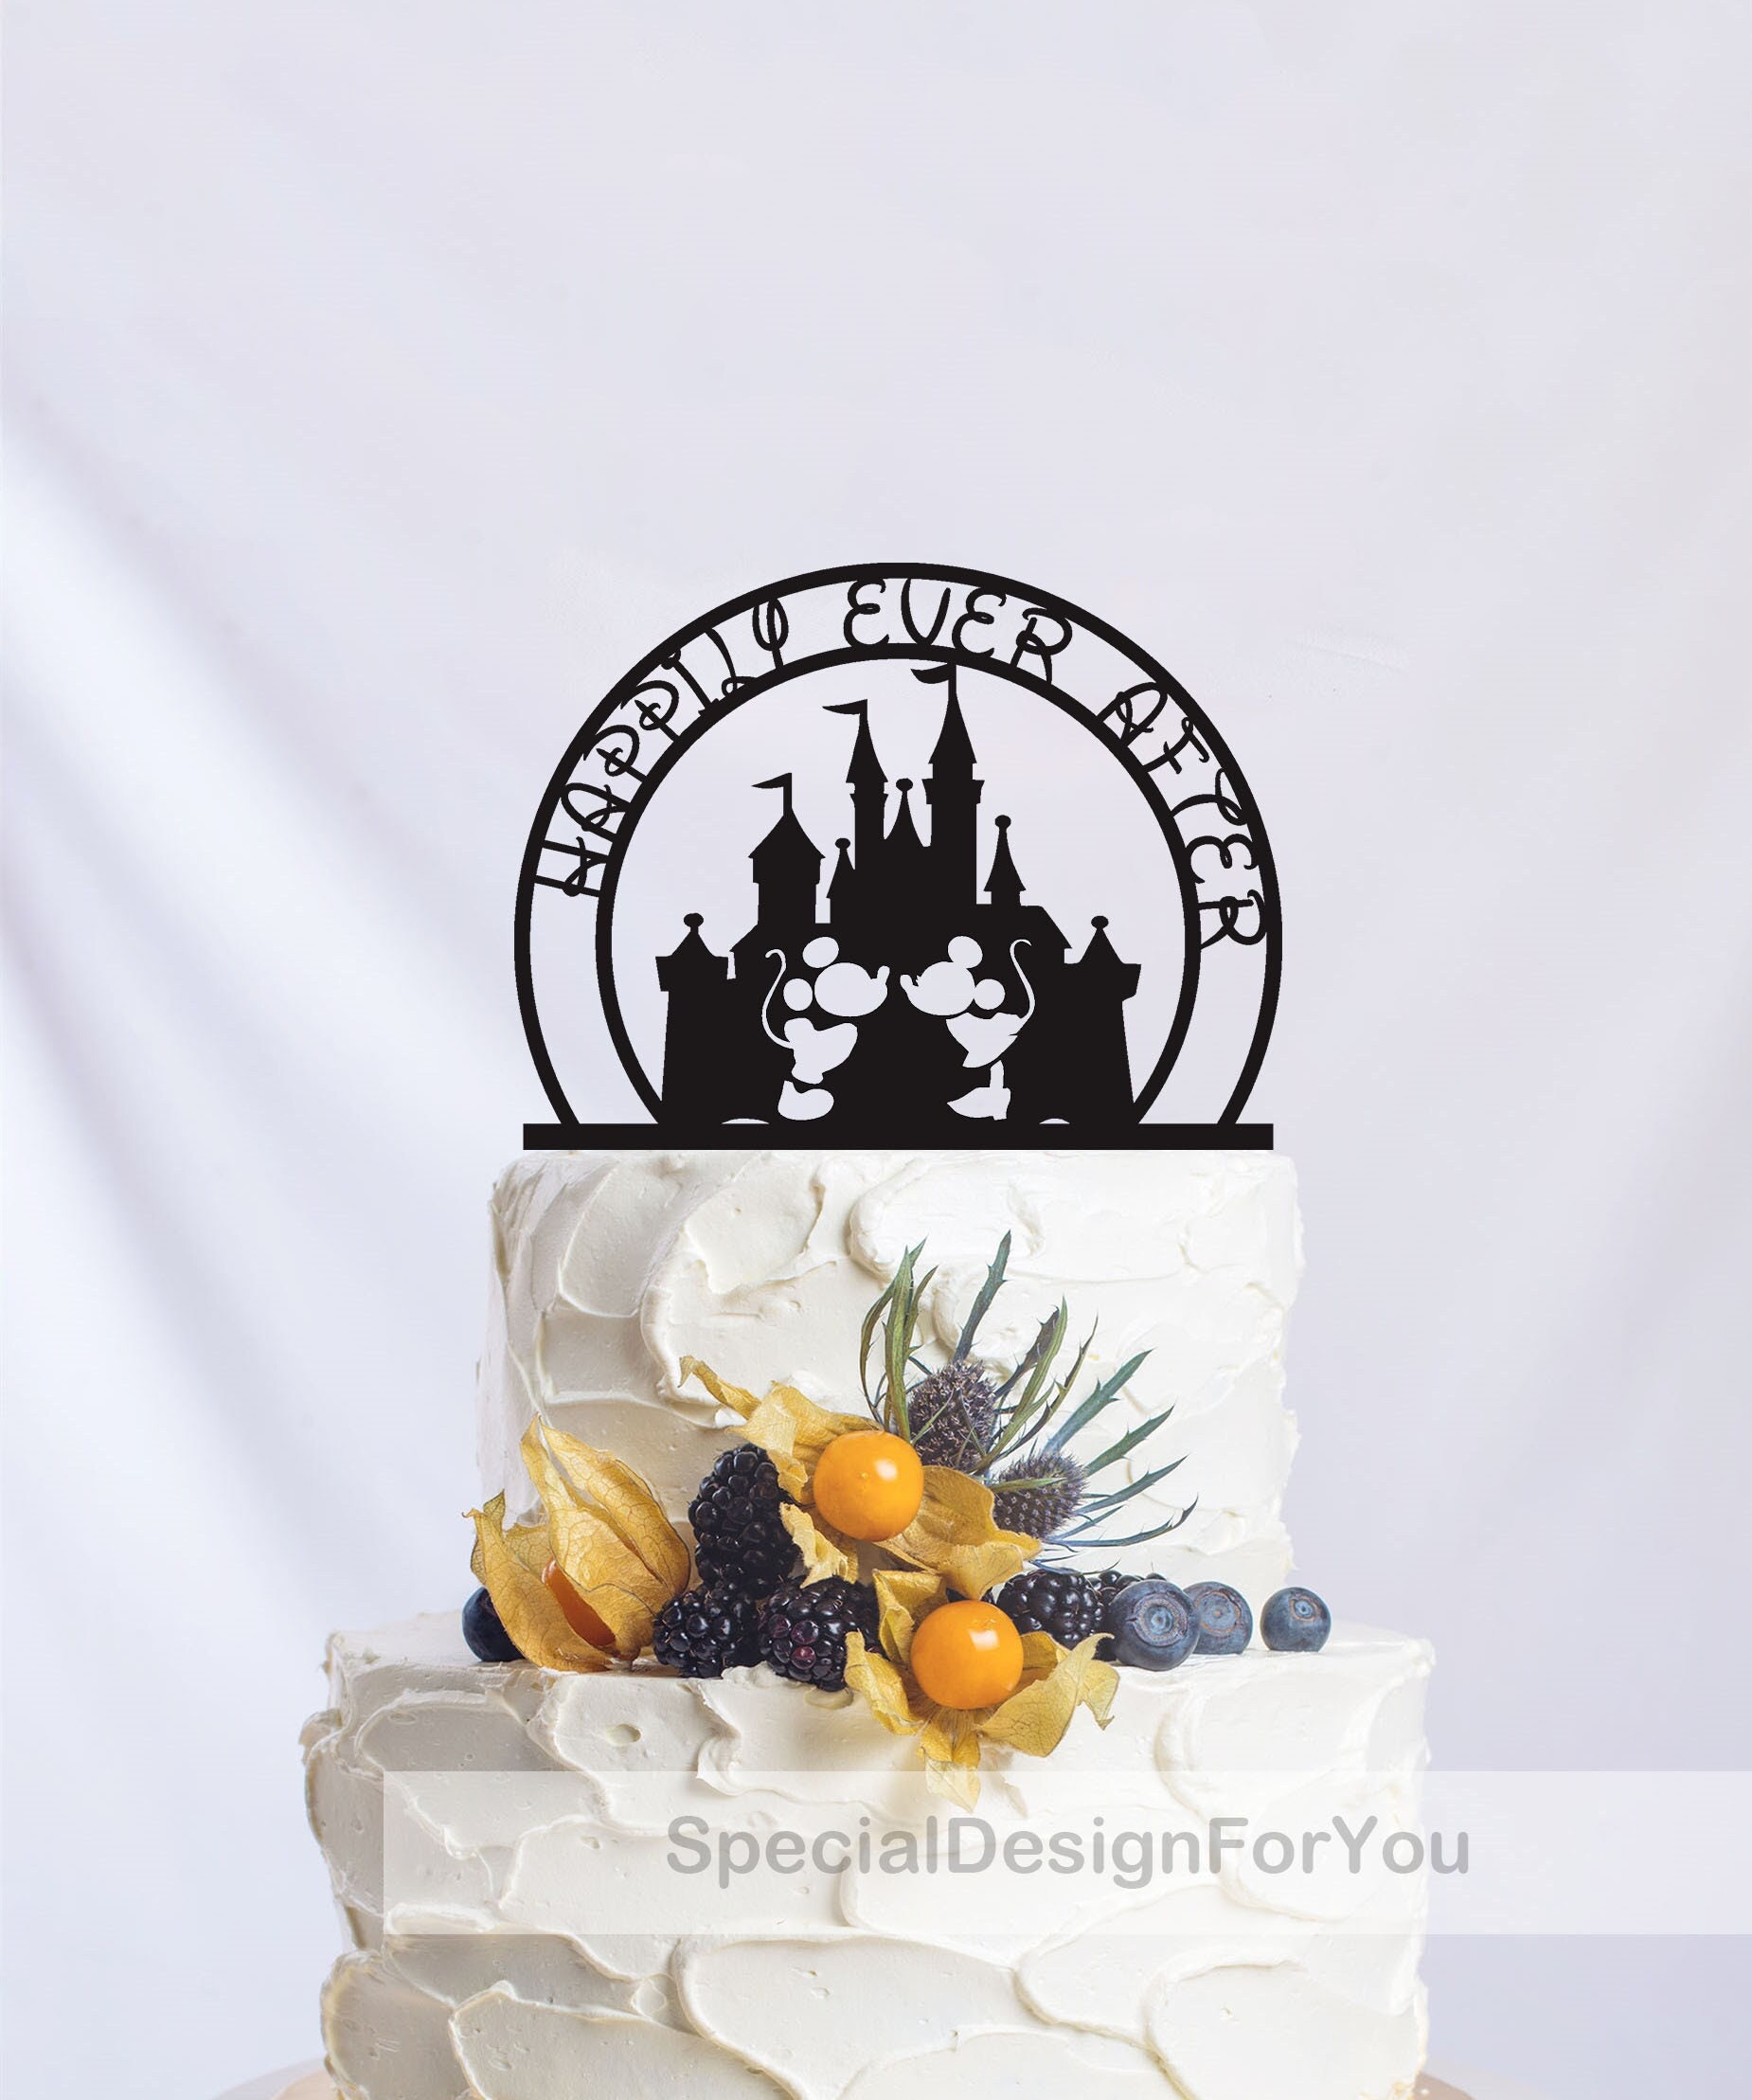 Disney Parks Exclusive Cinderella Castle Love is Magical Wedding Cake Topper